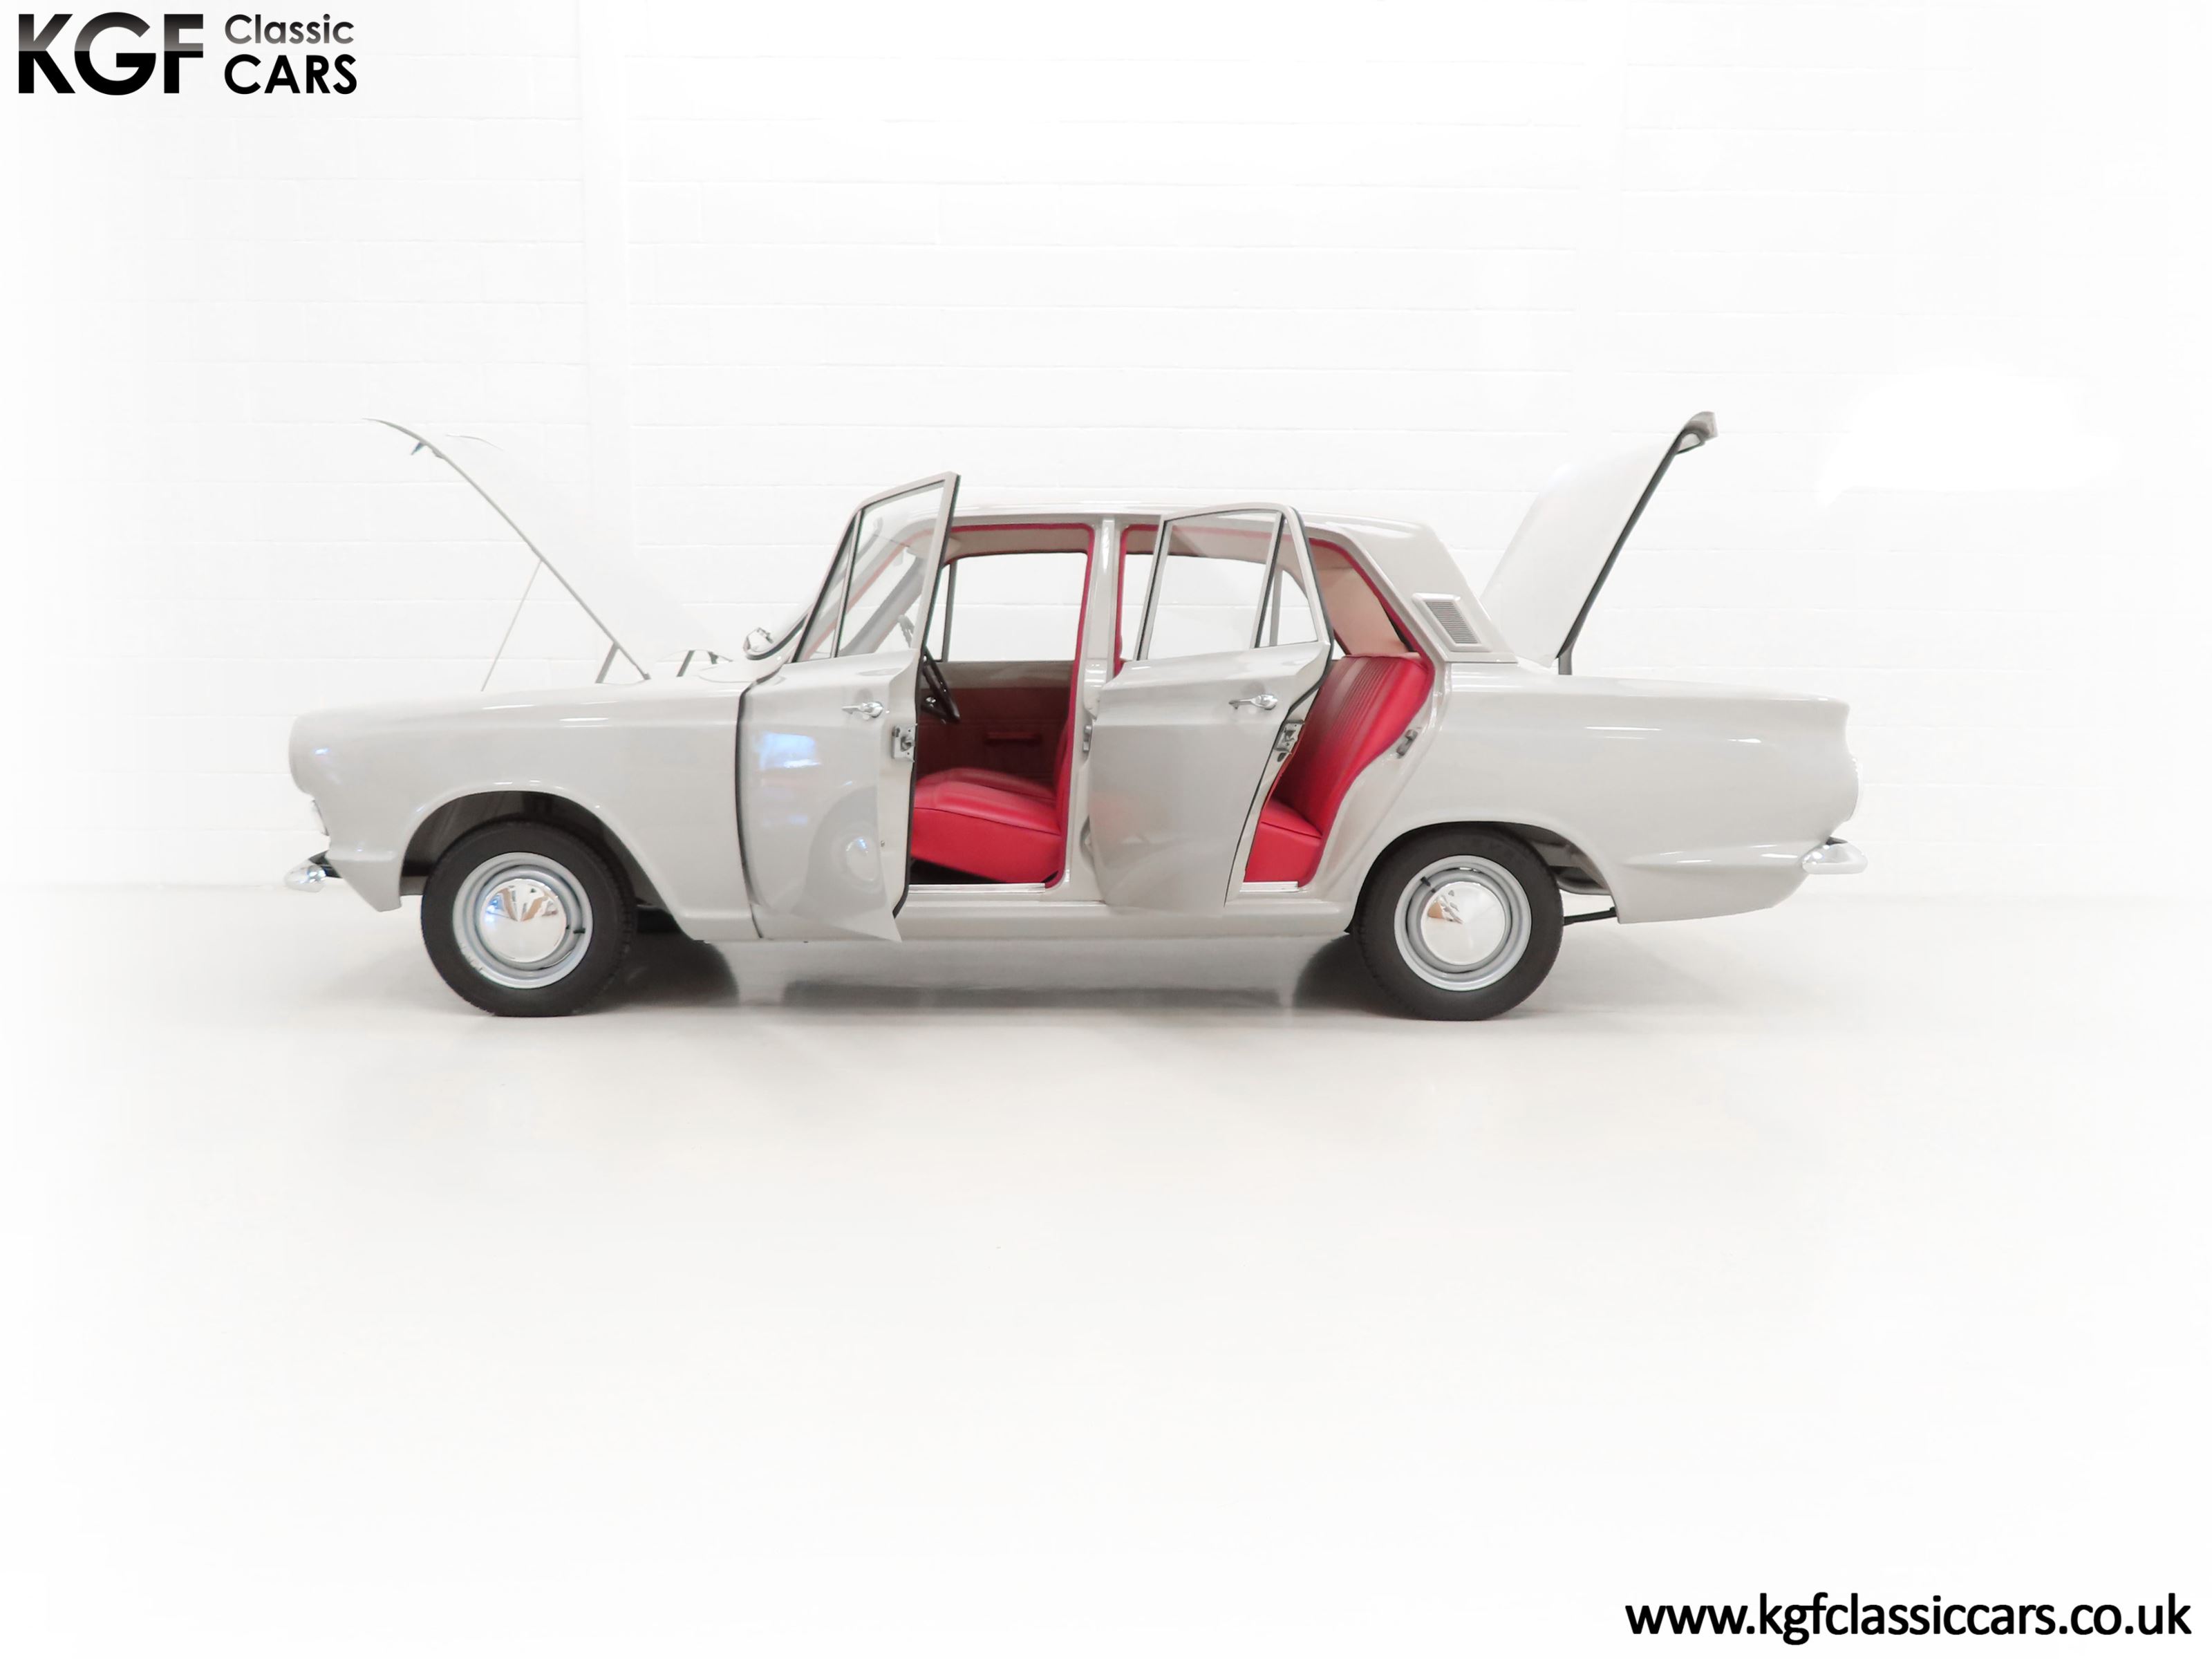 Ford cortina hpifphi4at7dxruny wux